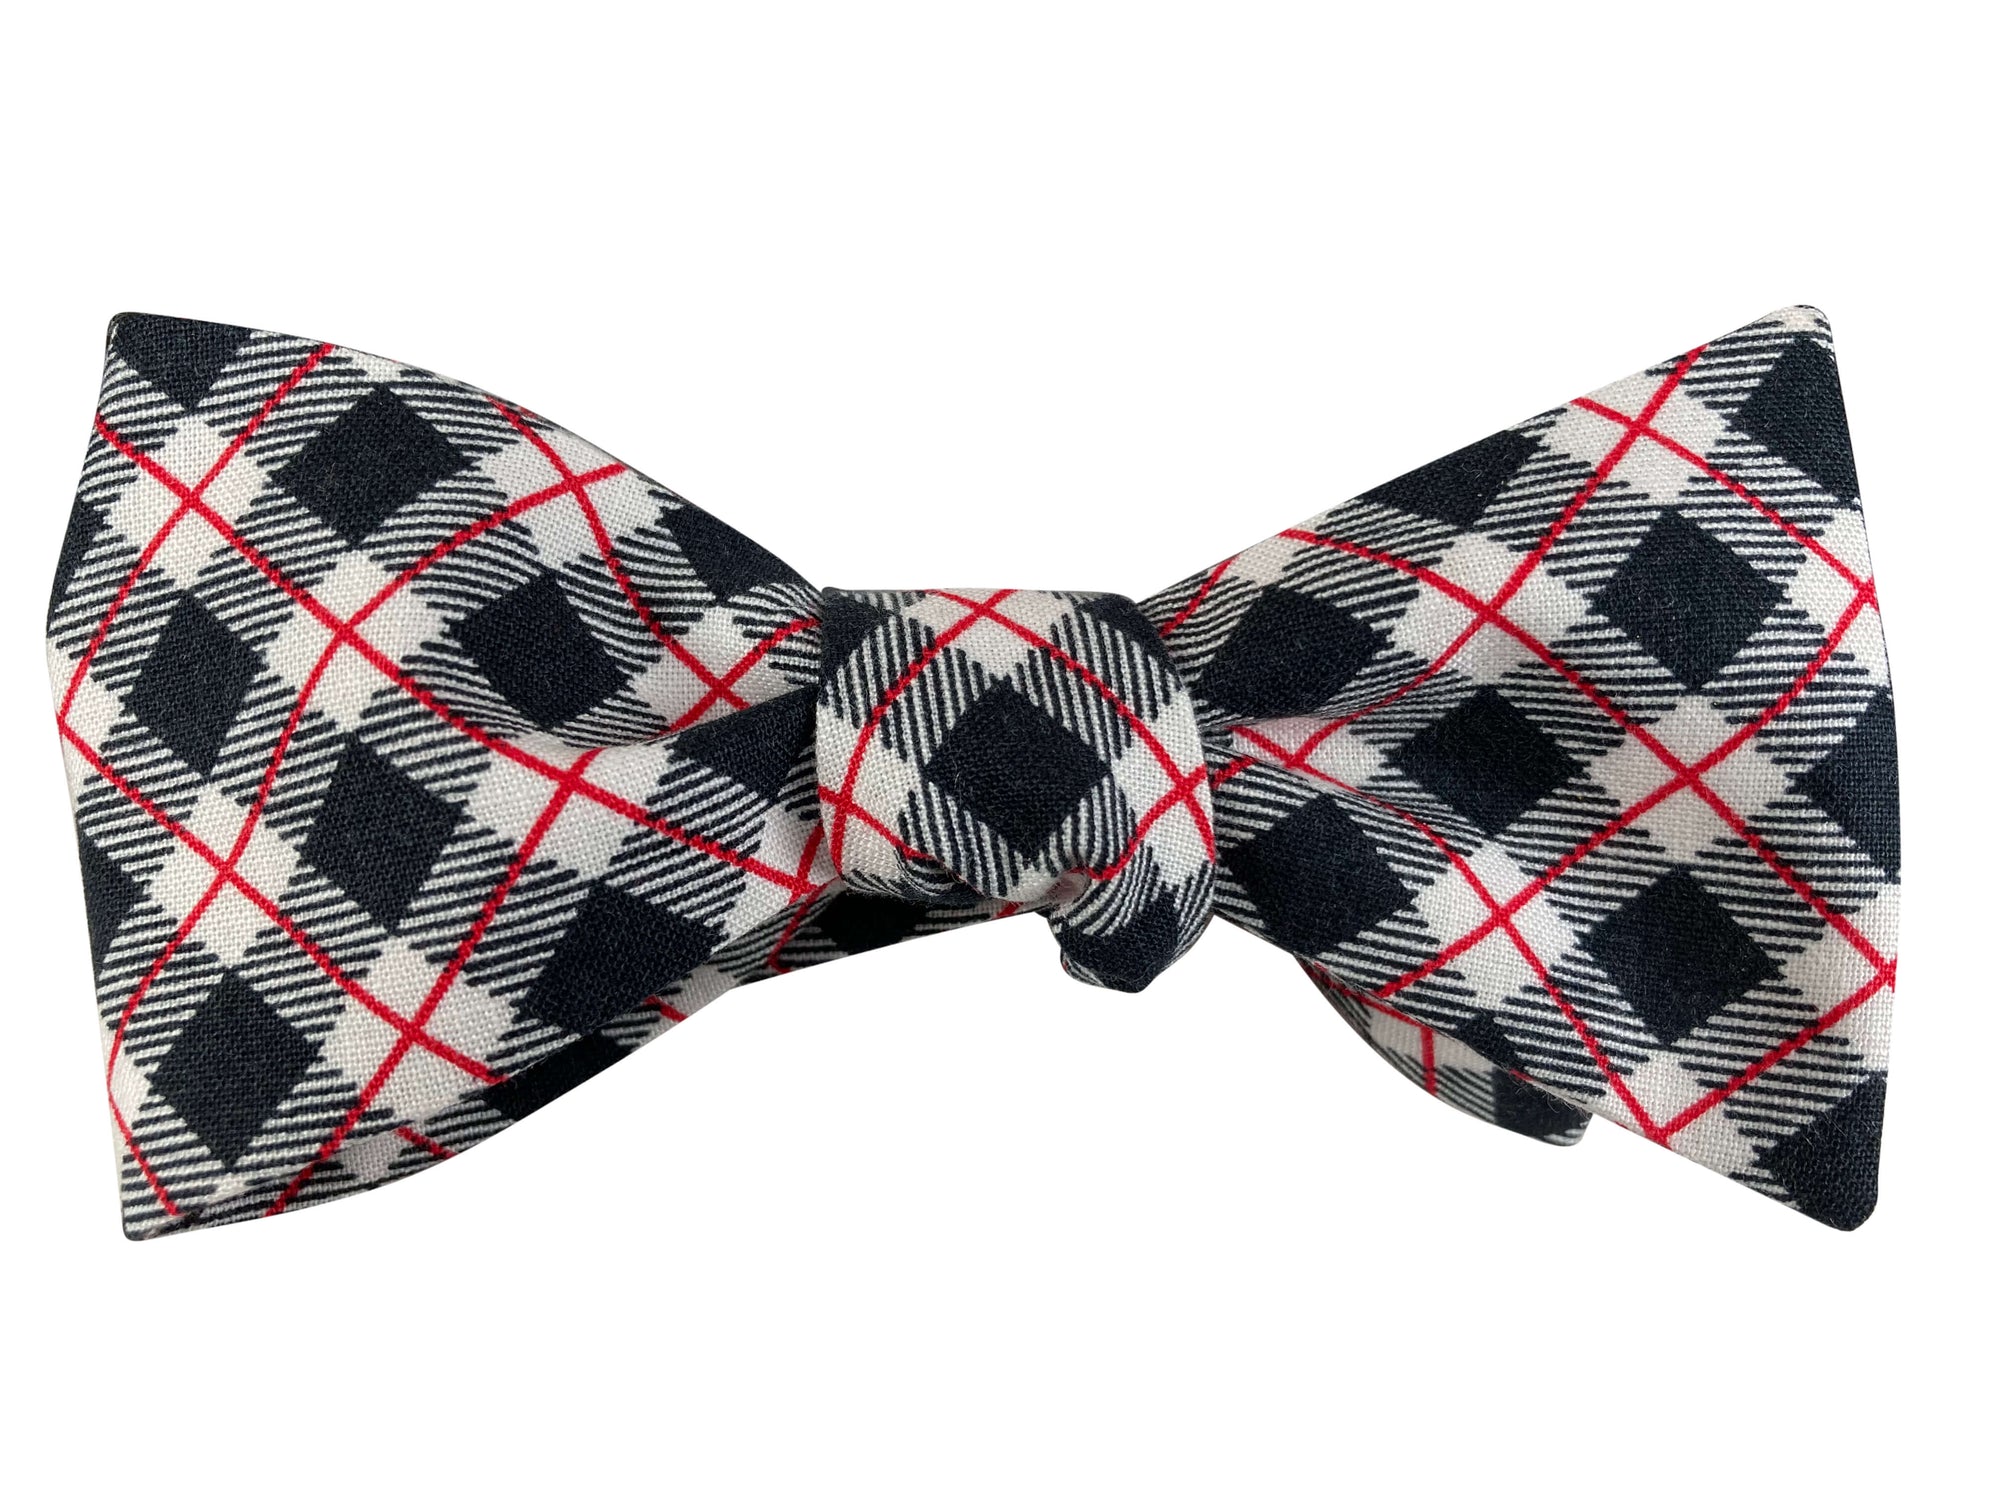 black red and white argyle patterned self tie bow tie